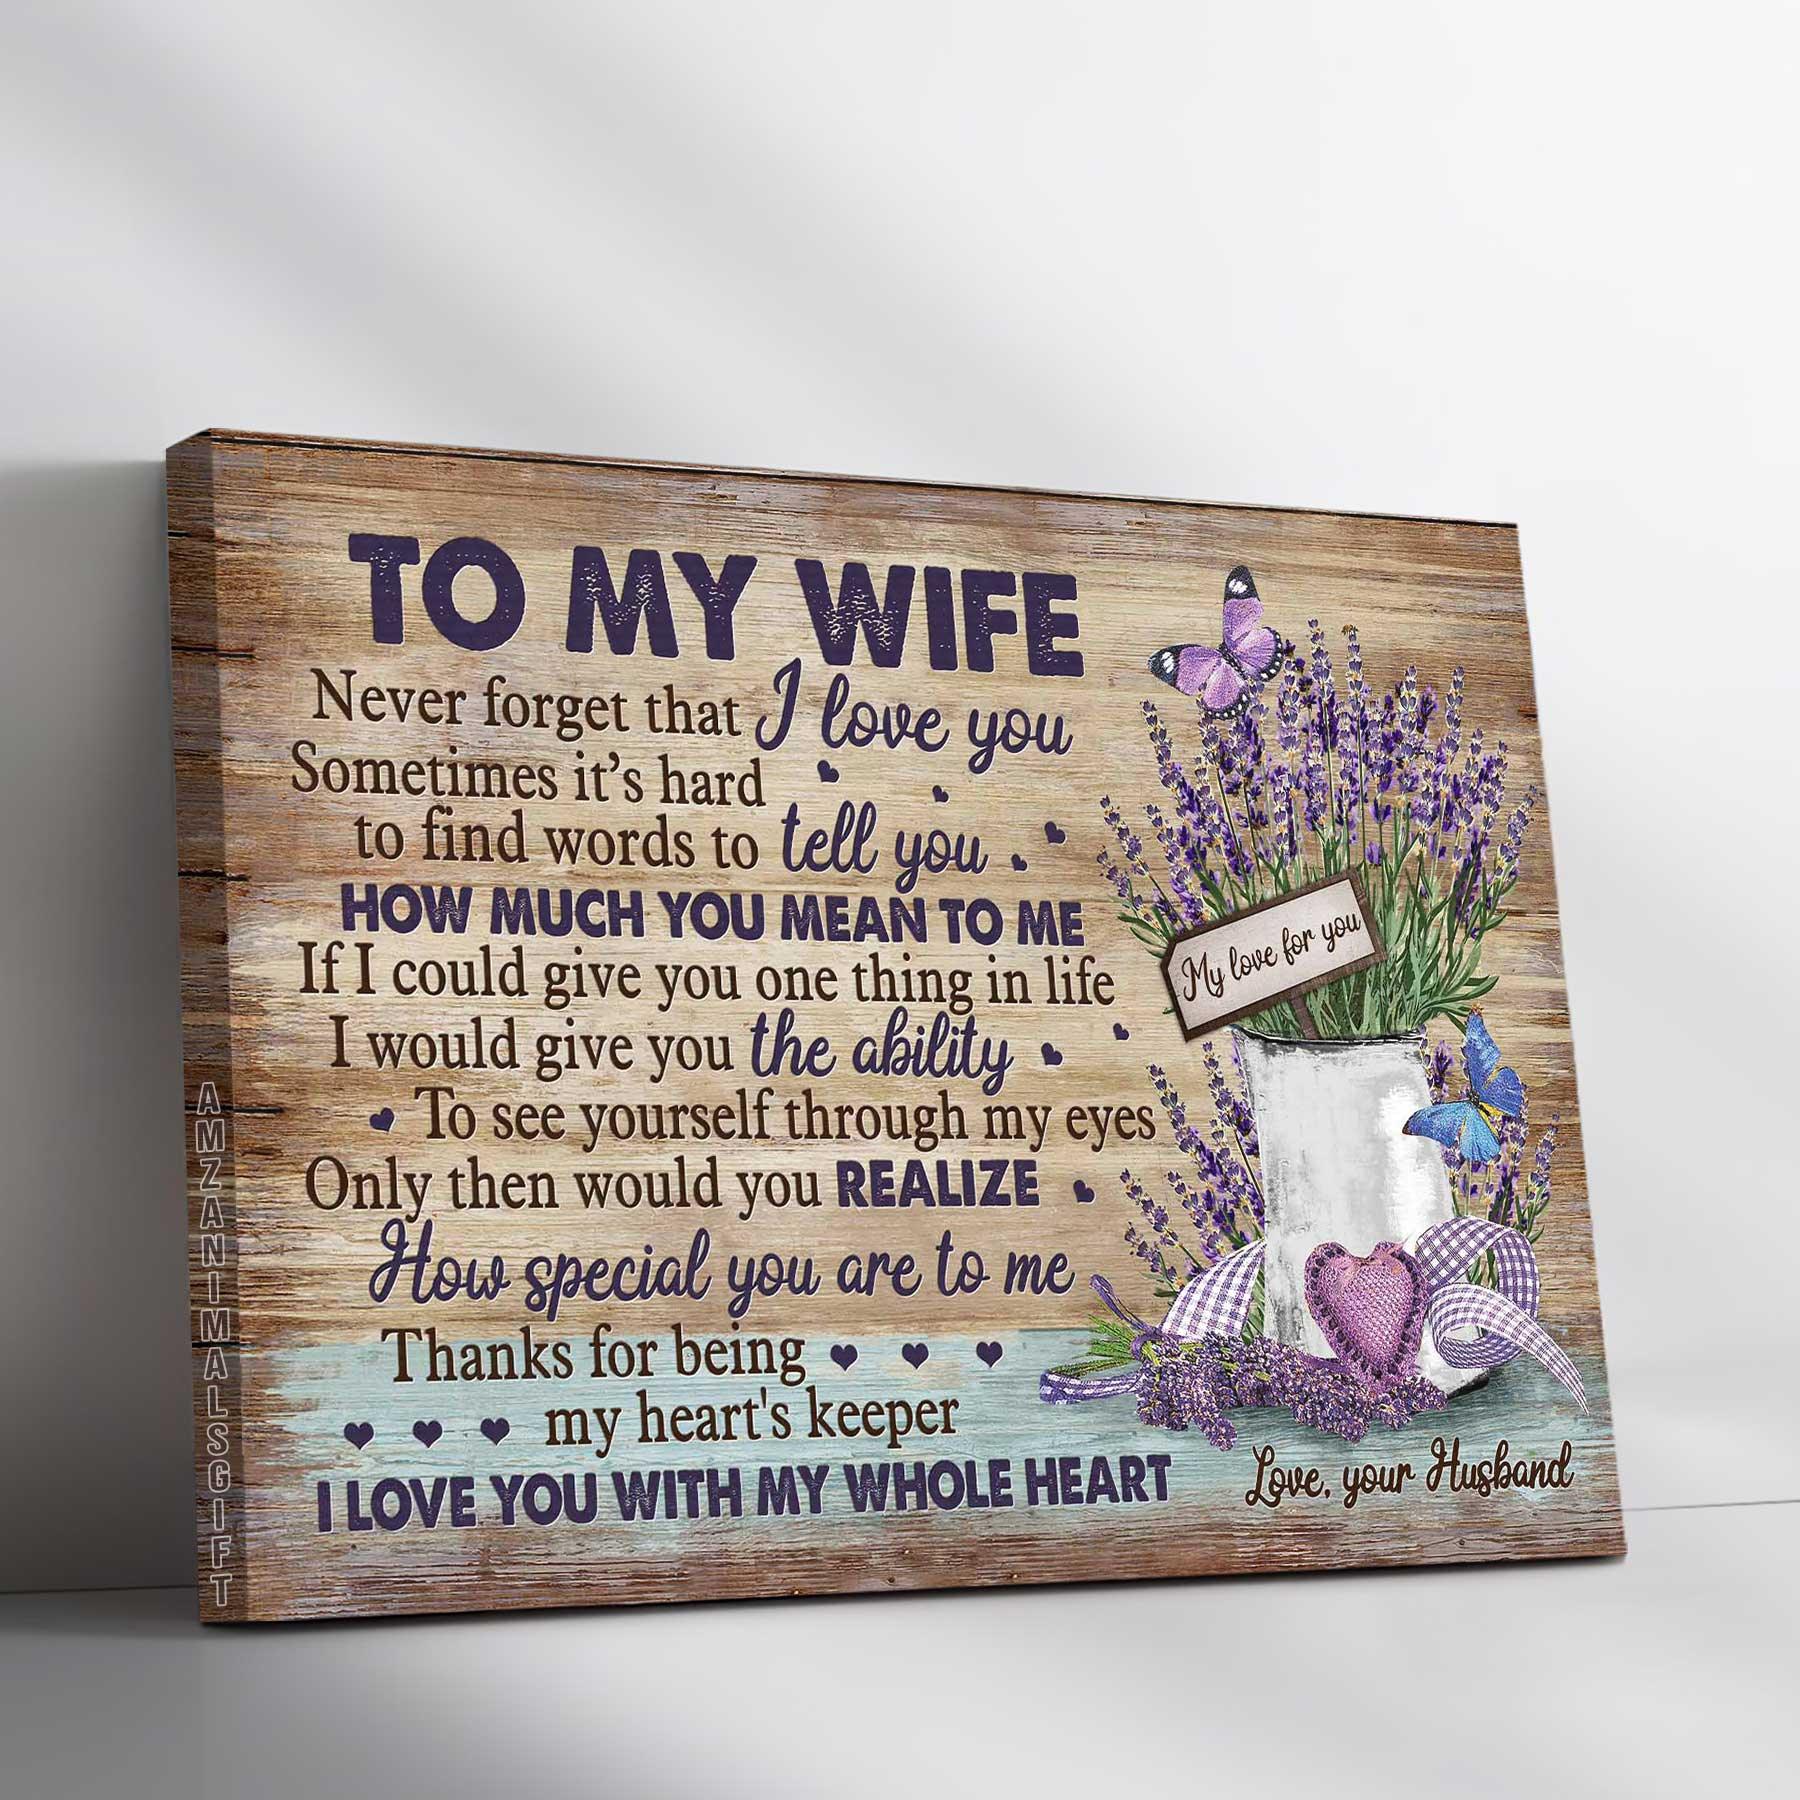 Couple Premium Wrapped Landscape Canvas - To My Wife, Lavender, I Love You With My Whole Heart - Perfect Gift For Couple, Spouse - Amzanimalsgift